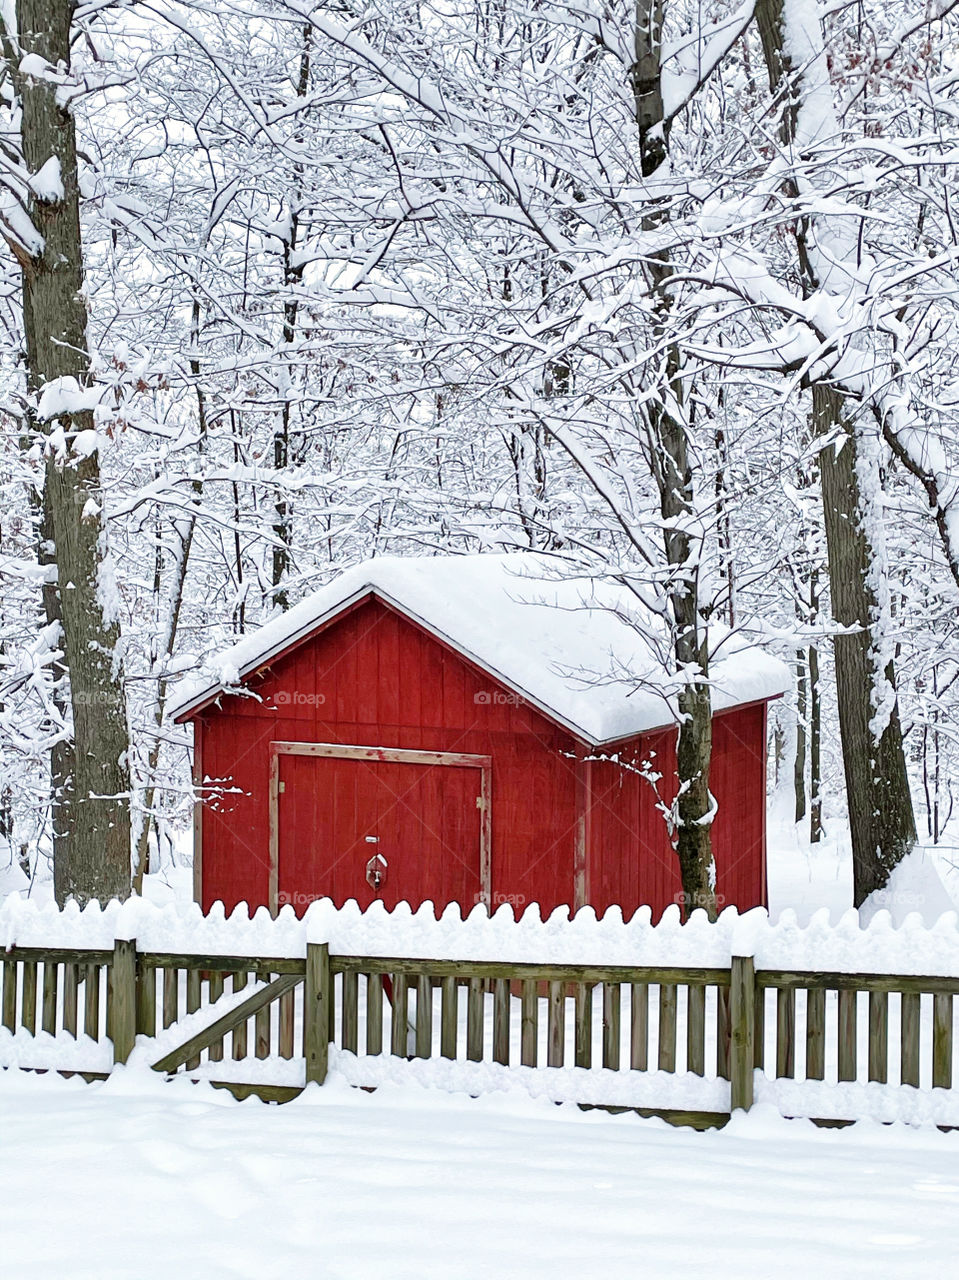 A red barn, shed surrounded by snowy trees. Christmas card perfect image. 